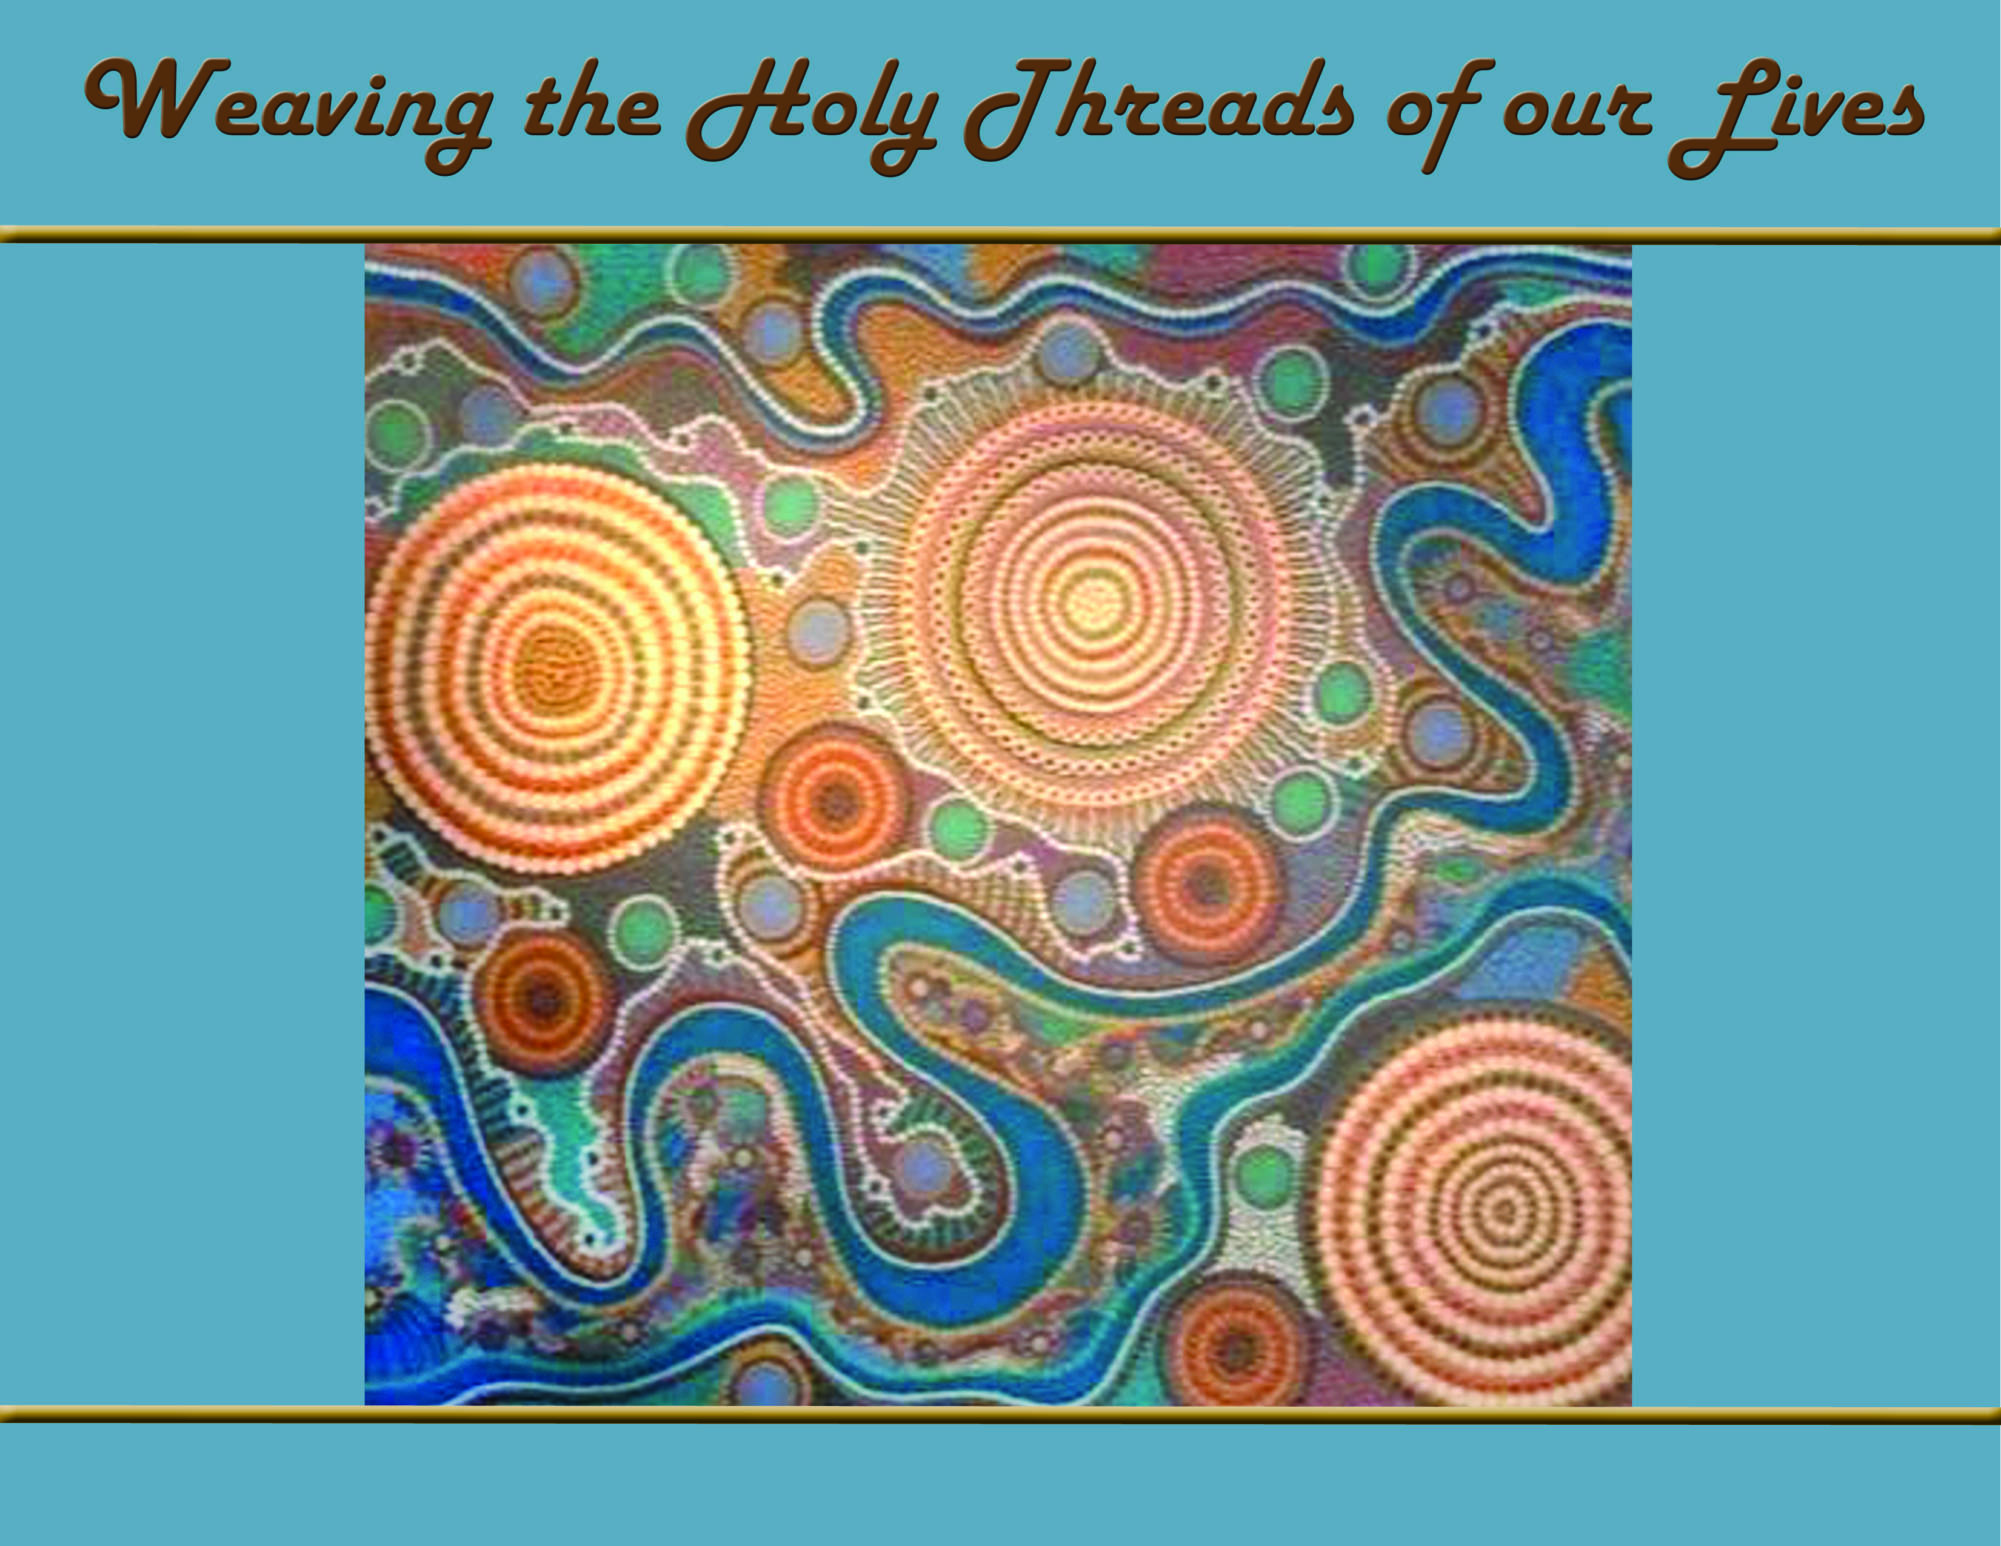 Weaving the Holy Threads of our Lives Registration